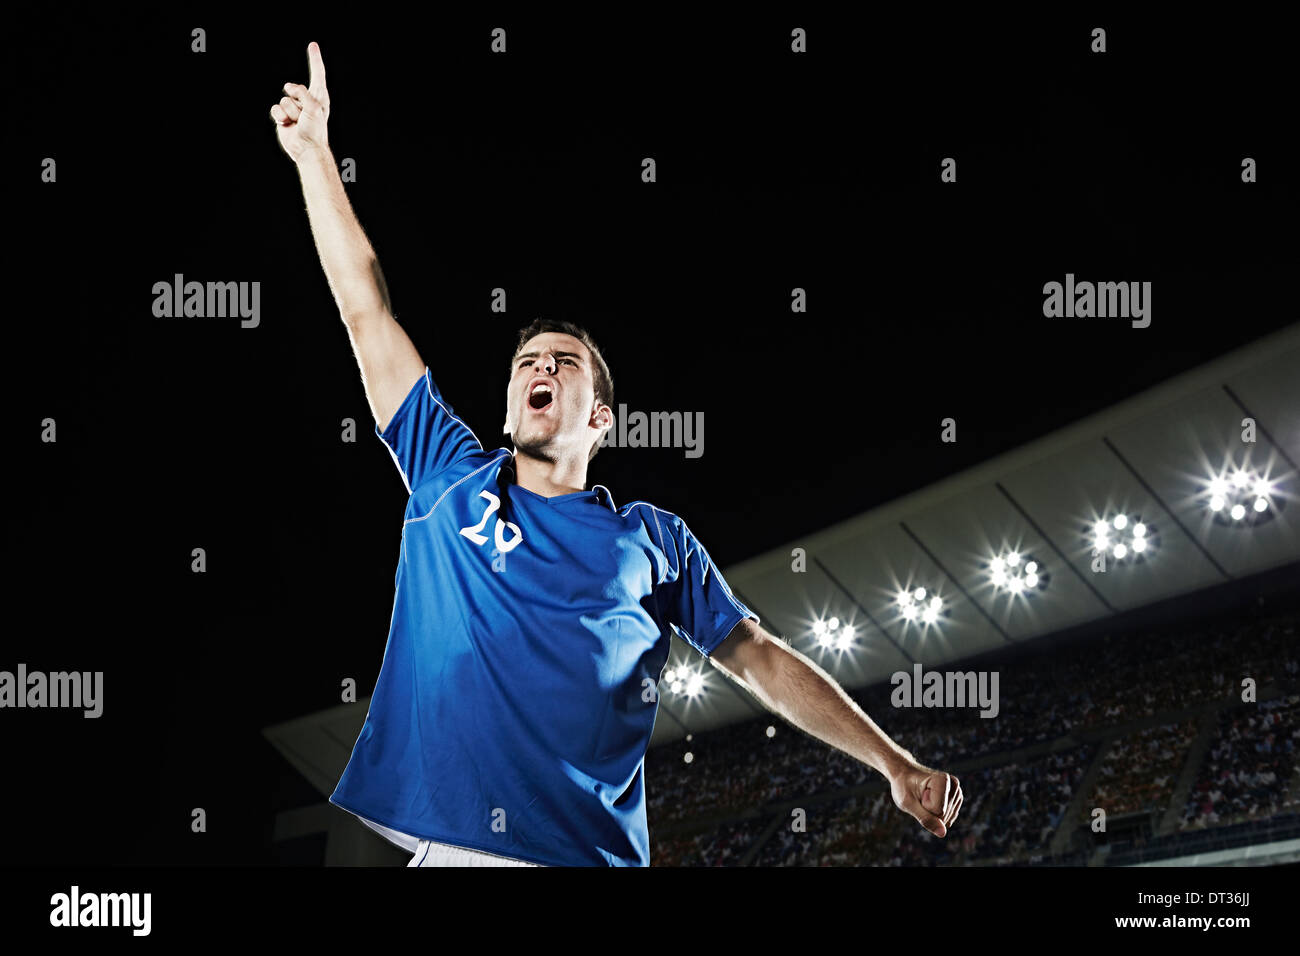 Soccer player cheering in stadium Banque D'Images